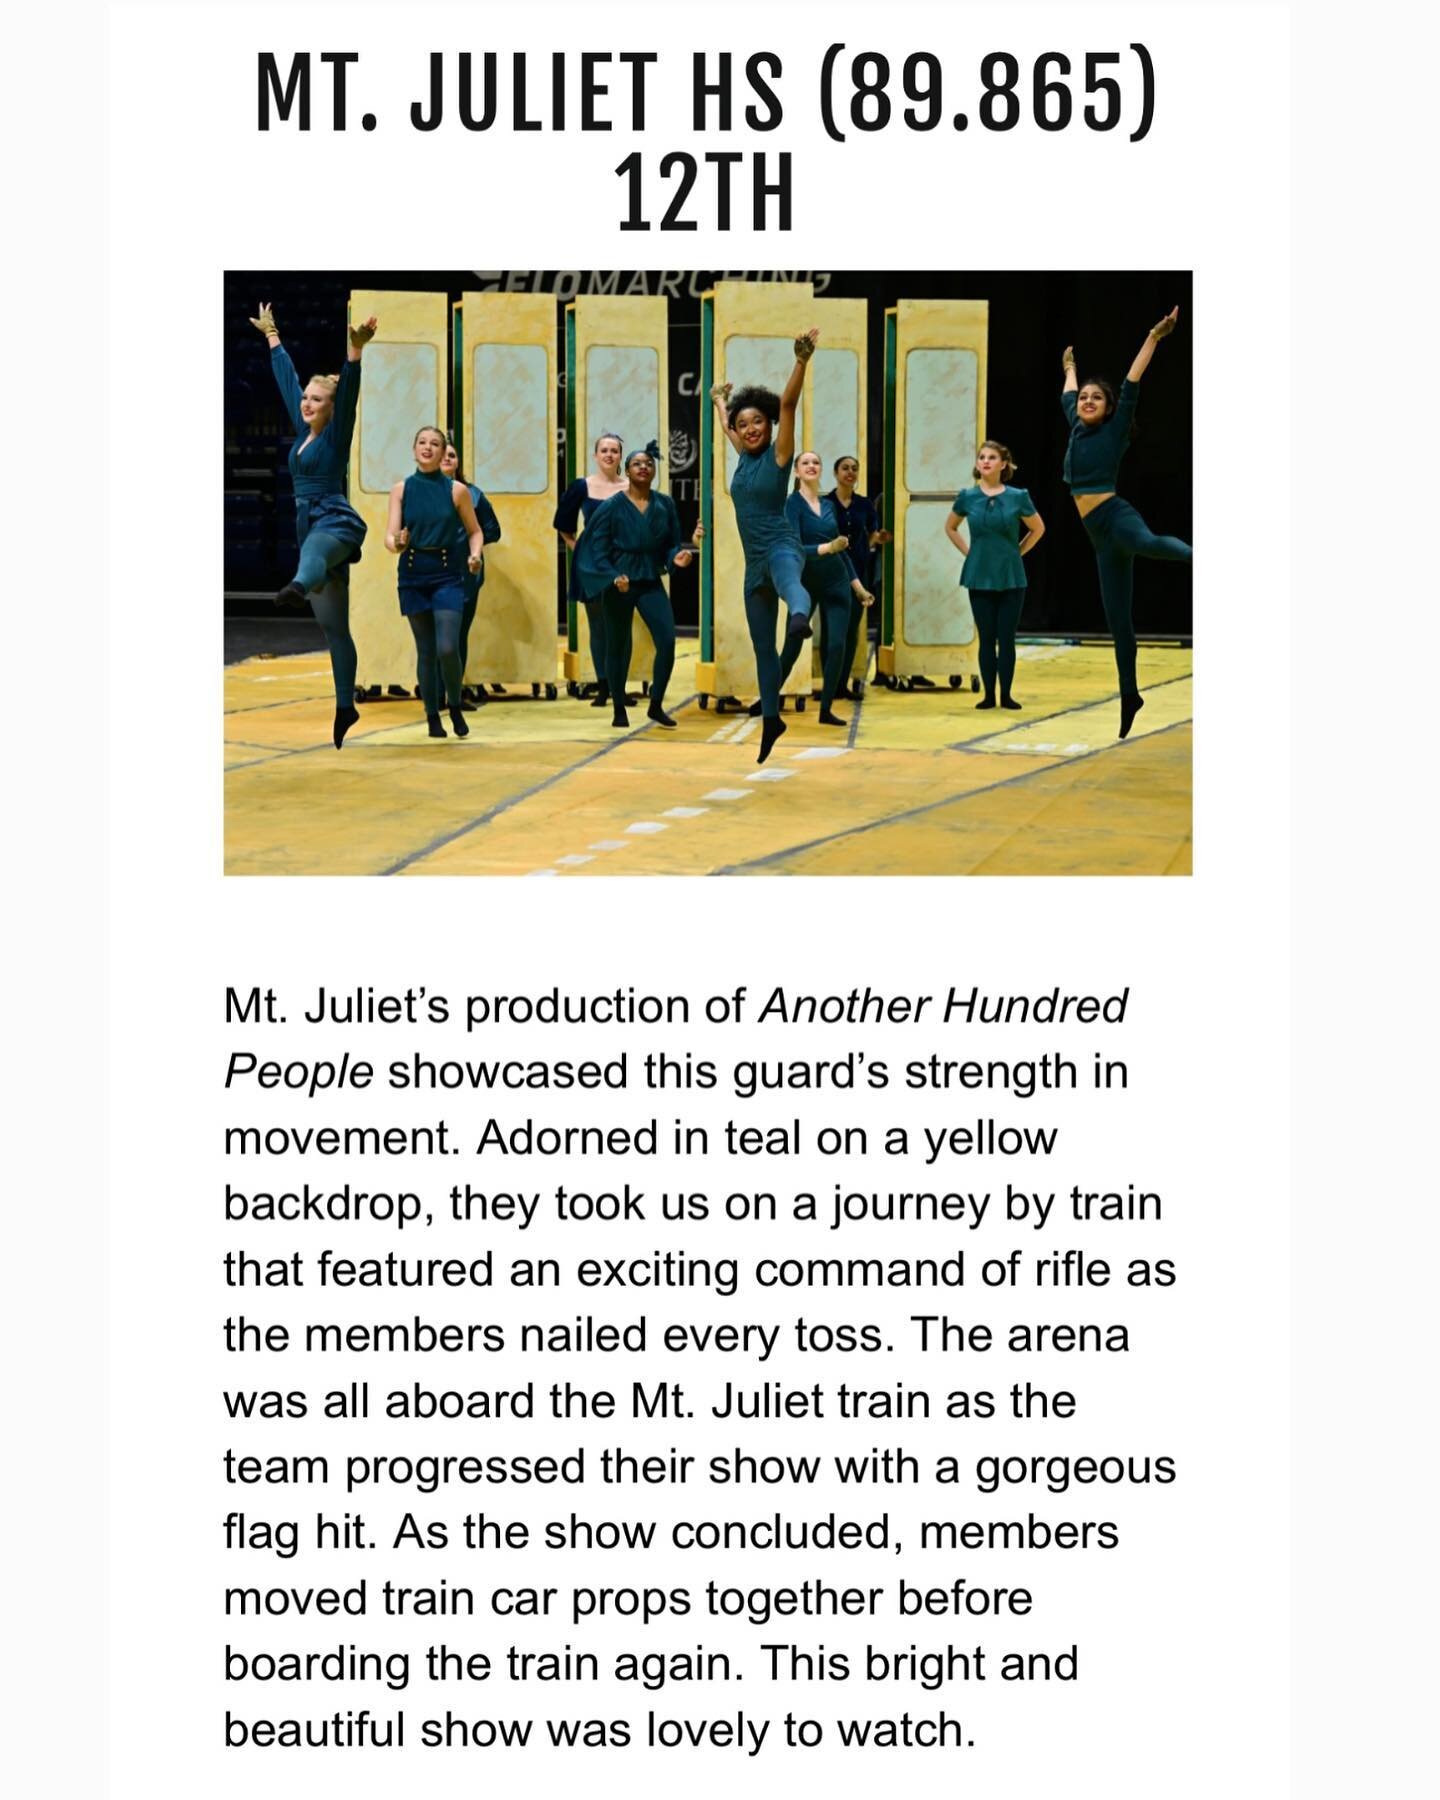 Huge congratulations to the @mtjulietcolorguard for their incredible season! Here&rsquo;s a well-written recap of their show and last performance in Finals at WGI World Championships. We couldn&rsquo;t be prouder of these young ladies!!!